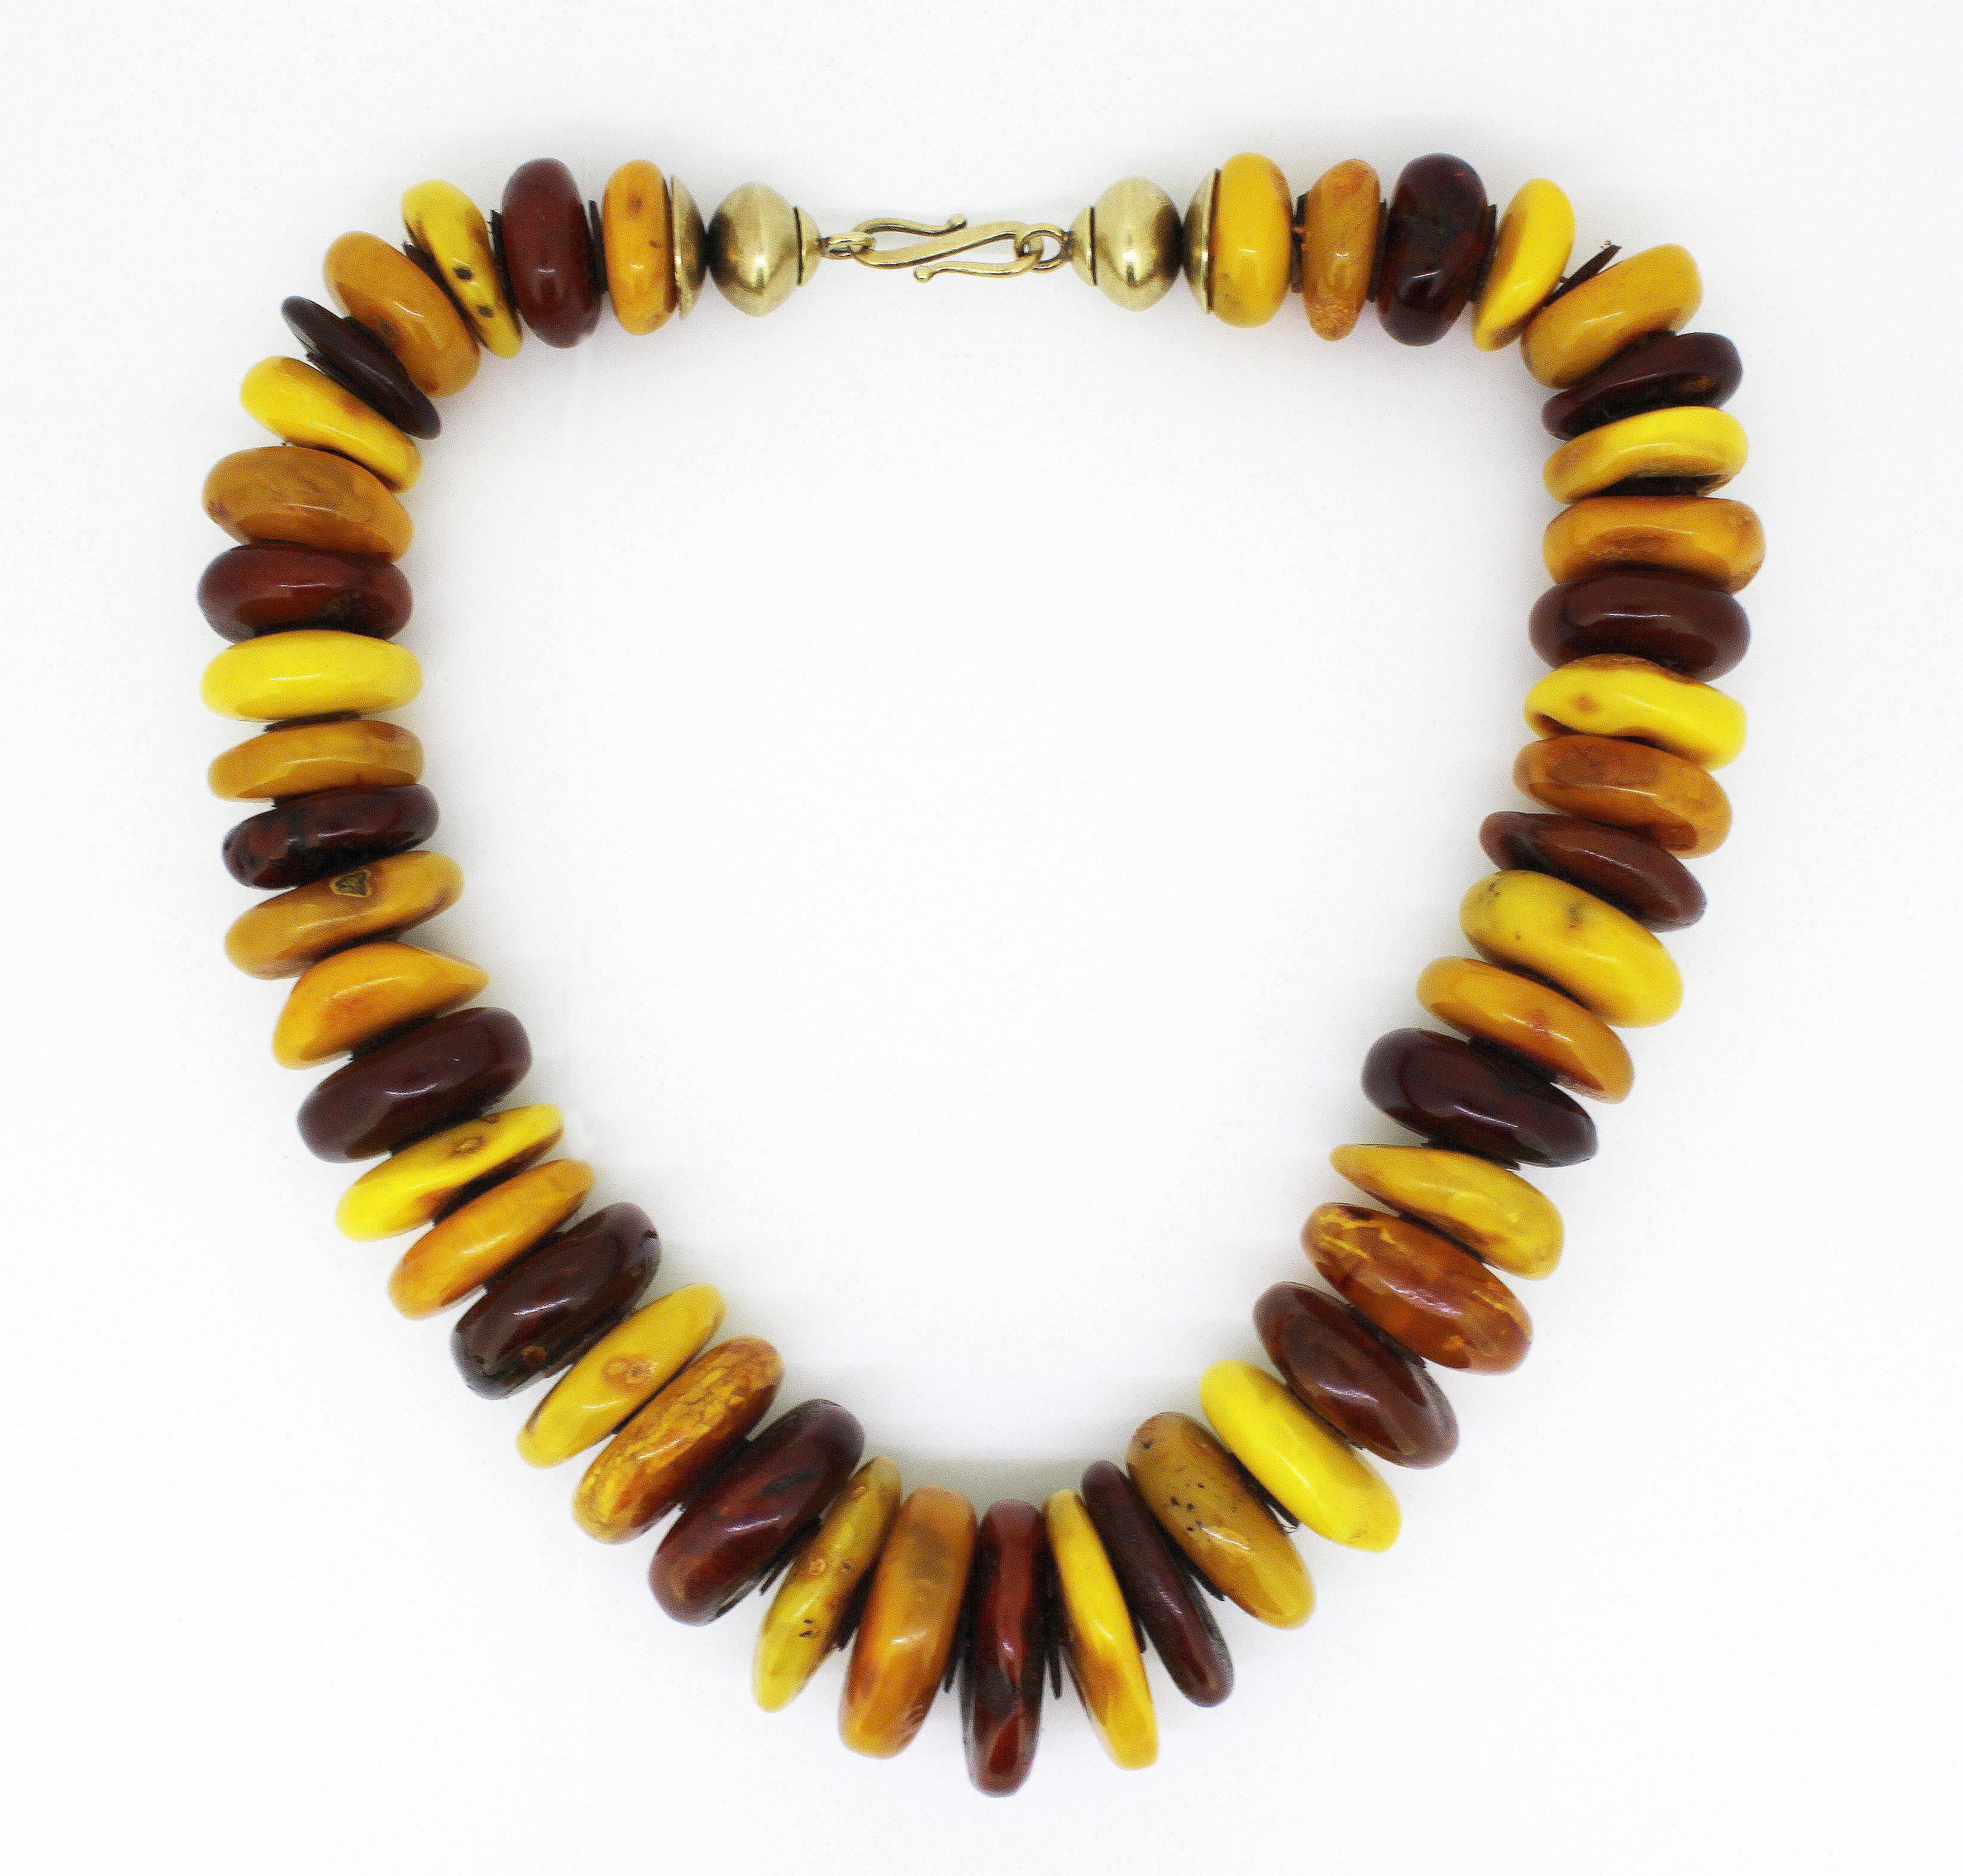 Natural Baltic amber necklace in the form of tablets.
Circa 1950's

Dimensions -
Length : 48.5 cm
Width : 3 cm
Weight : 166 grams

Amber - 
Treatment : Natural

Condition: Pre-owned, general used, no damage, excellent overall condition, please see